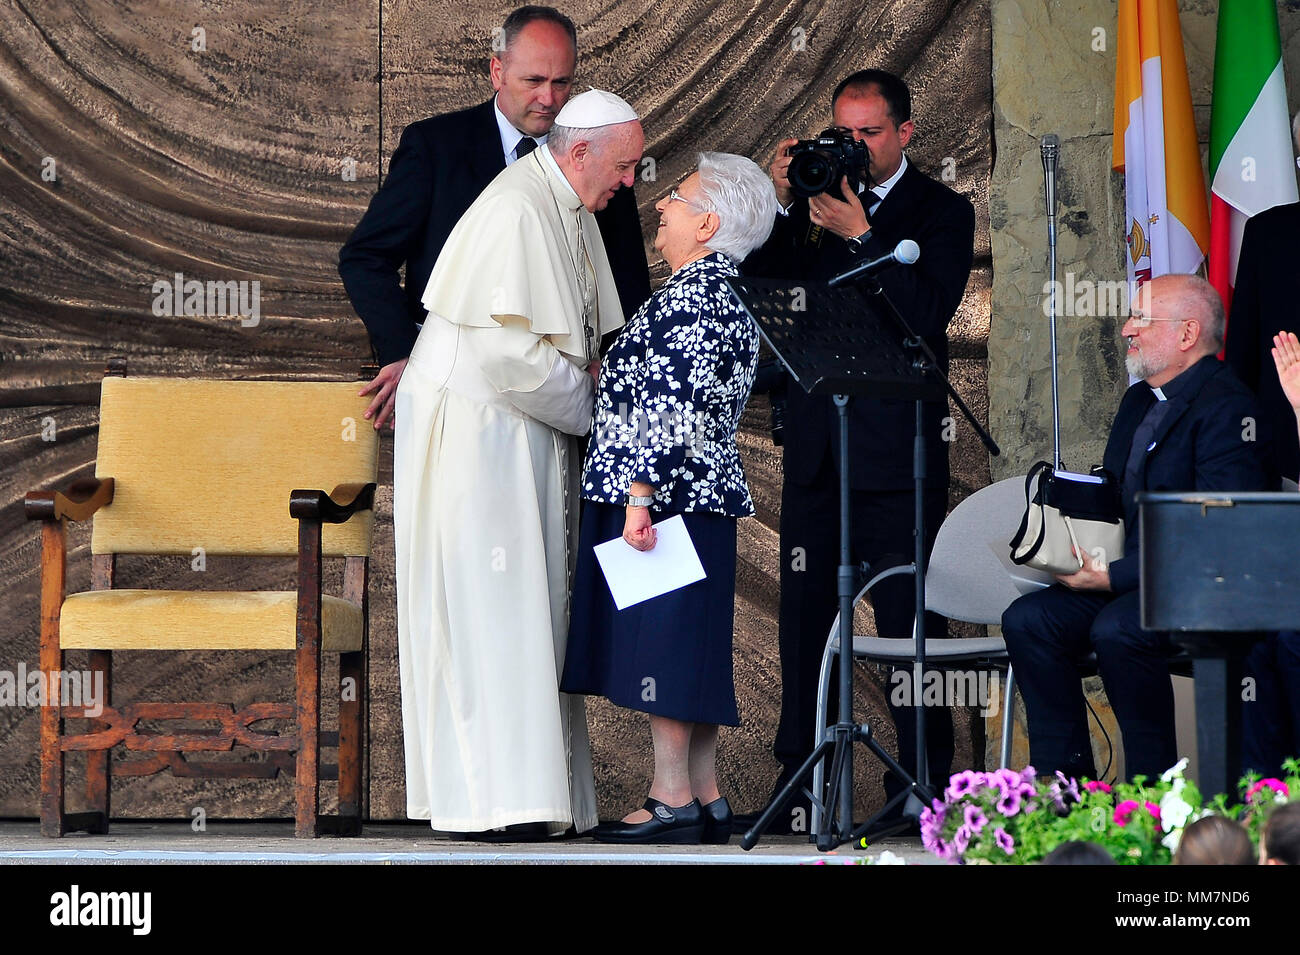 LOPPIANO, ITALY 11 MAY 2018 - POPE FRANCIS ON LOPPIANO VISIT, THE CITADEL  OF MOVEMENT OF THE FOCOLARS - IN THE PHOTO: POPE FRANCESCO SALUTA MARIA  VOCE, PRESIDENT OF THE MOVEMENT OF